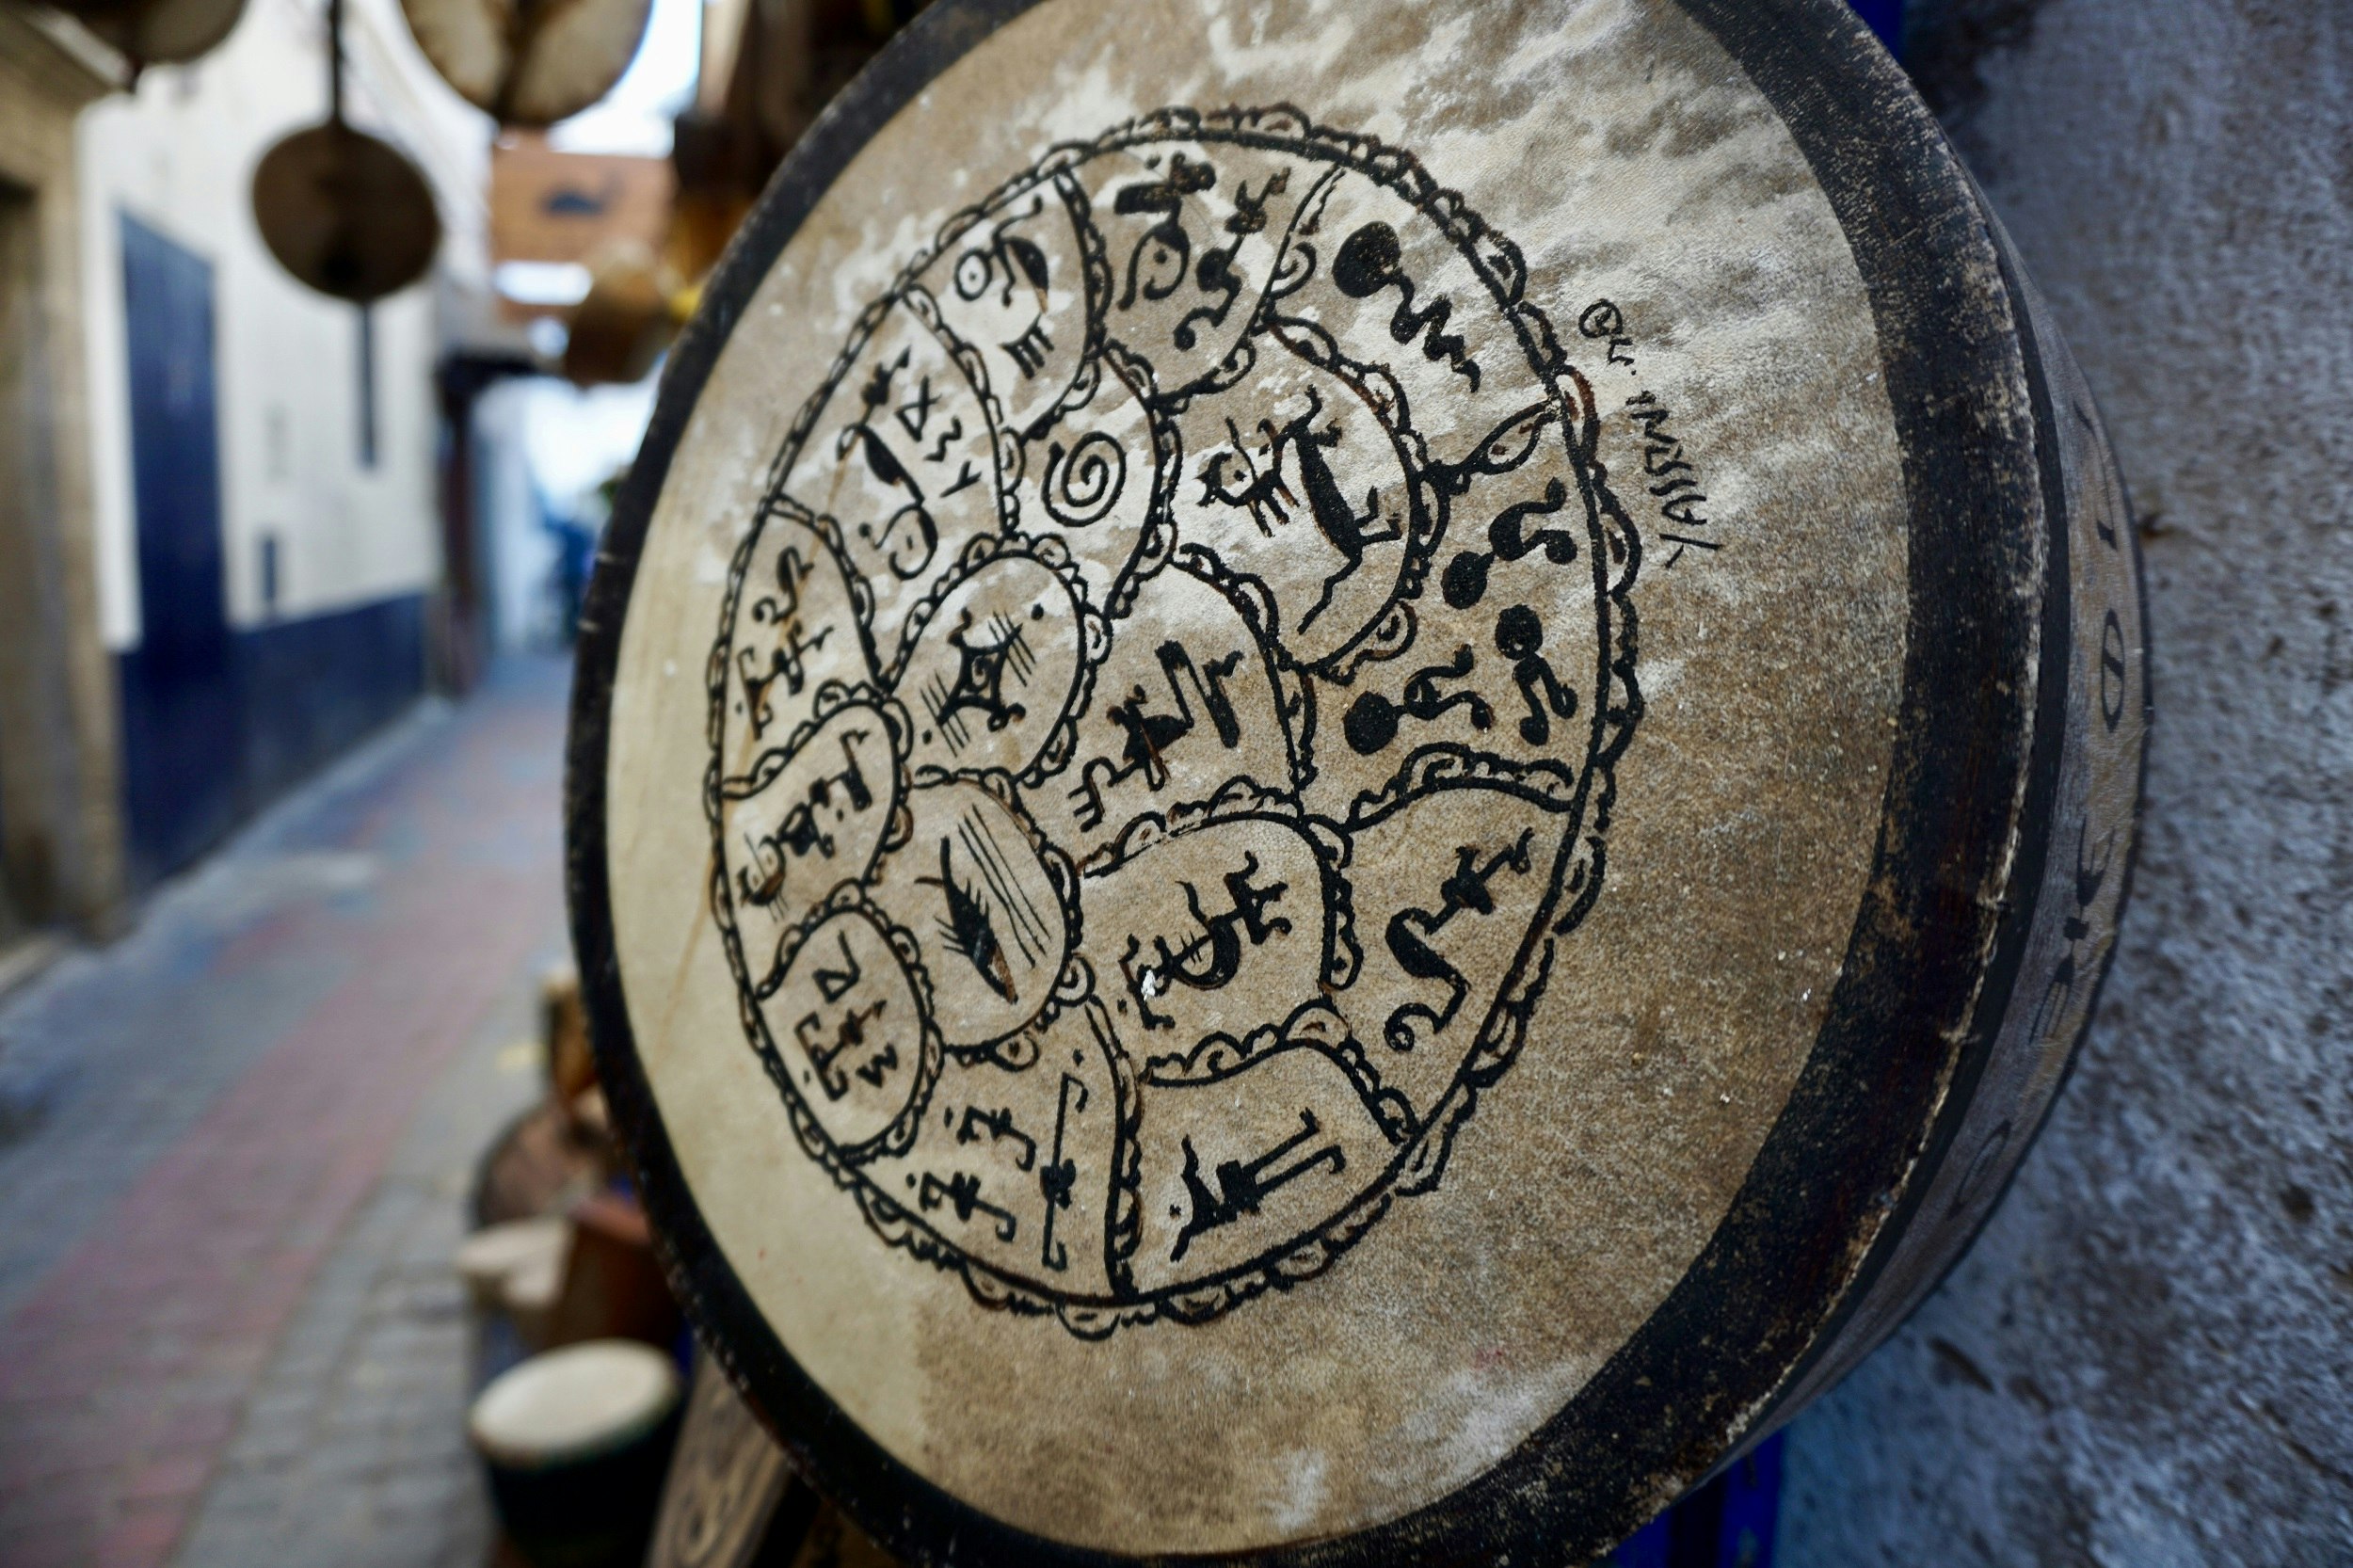 A shallow drum - covered in Berber writing and symbols - hangs on the wall of a music shop in an alleyway of Essaouira.